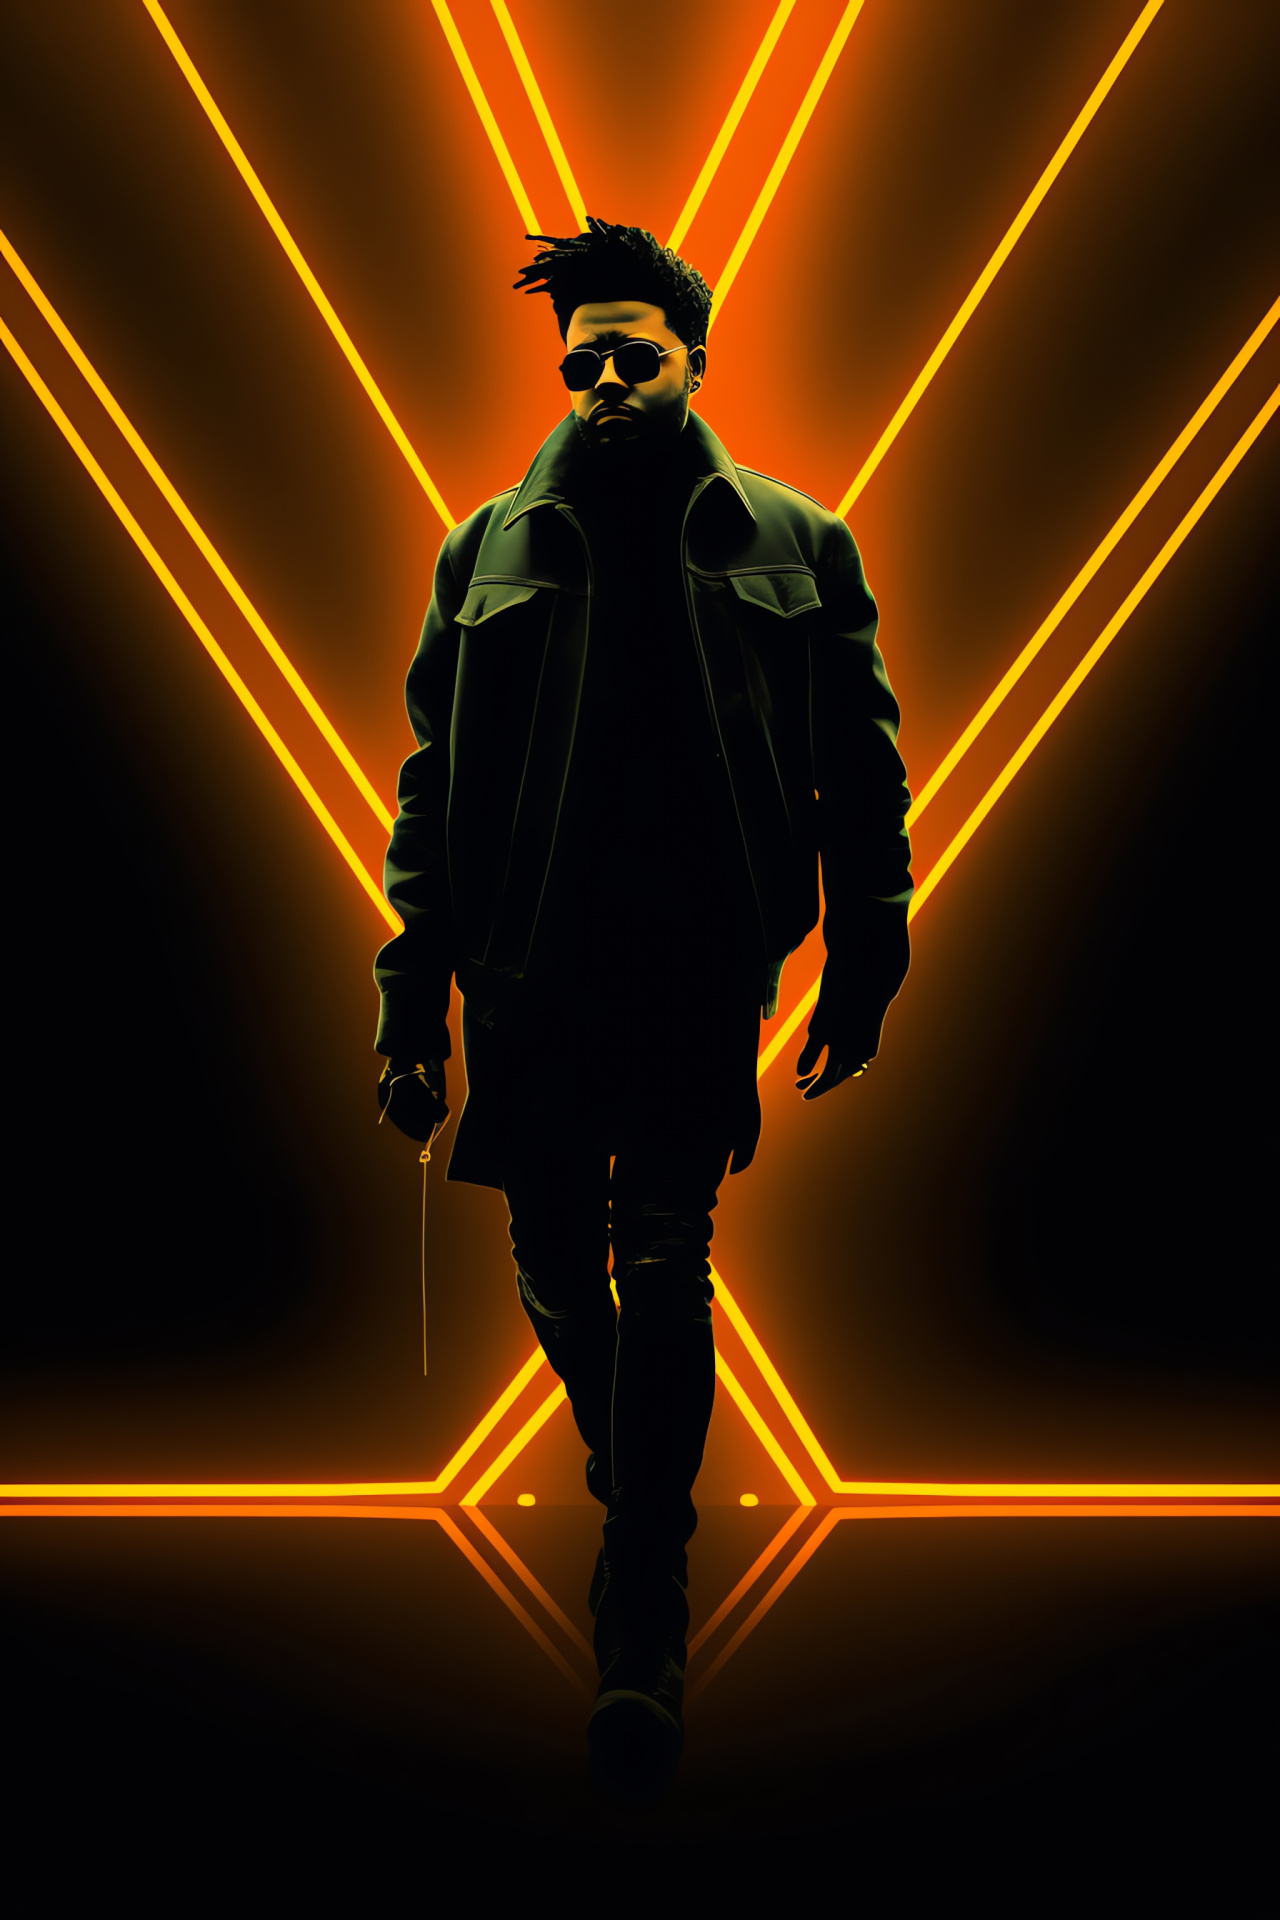 The Weeknd, Celebrity style, Pop music scene, Artistic presence, Fashionable entertainer, HD Phone Image